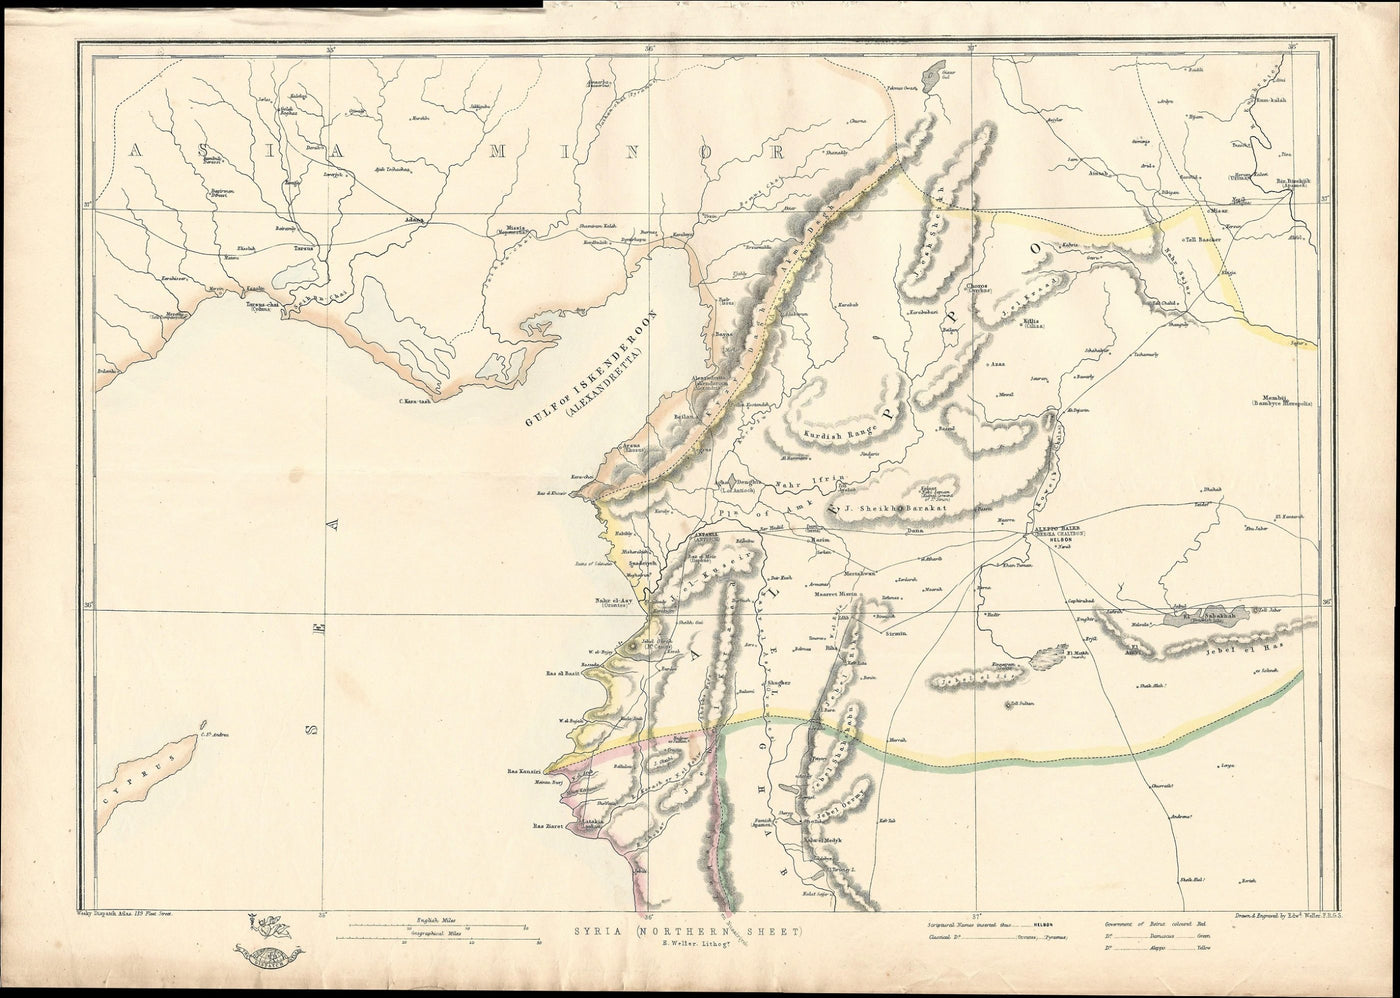 Syria antique map from Weekly Dispatch Atlas 1863